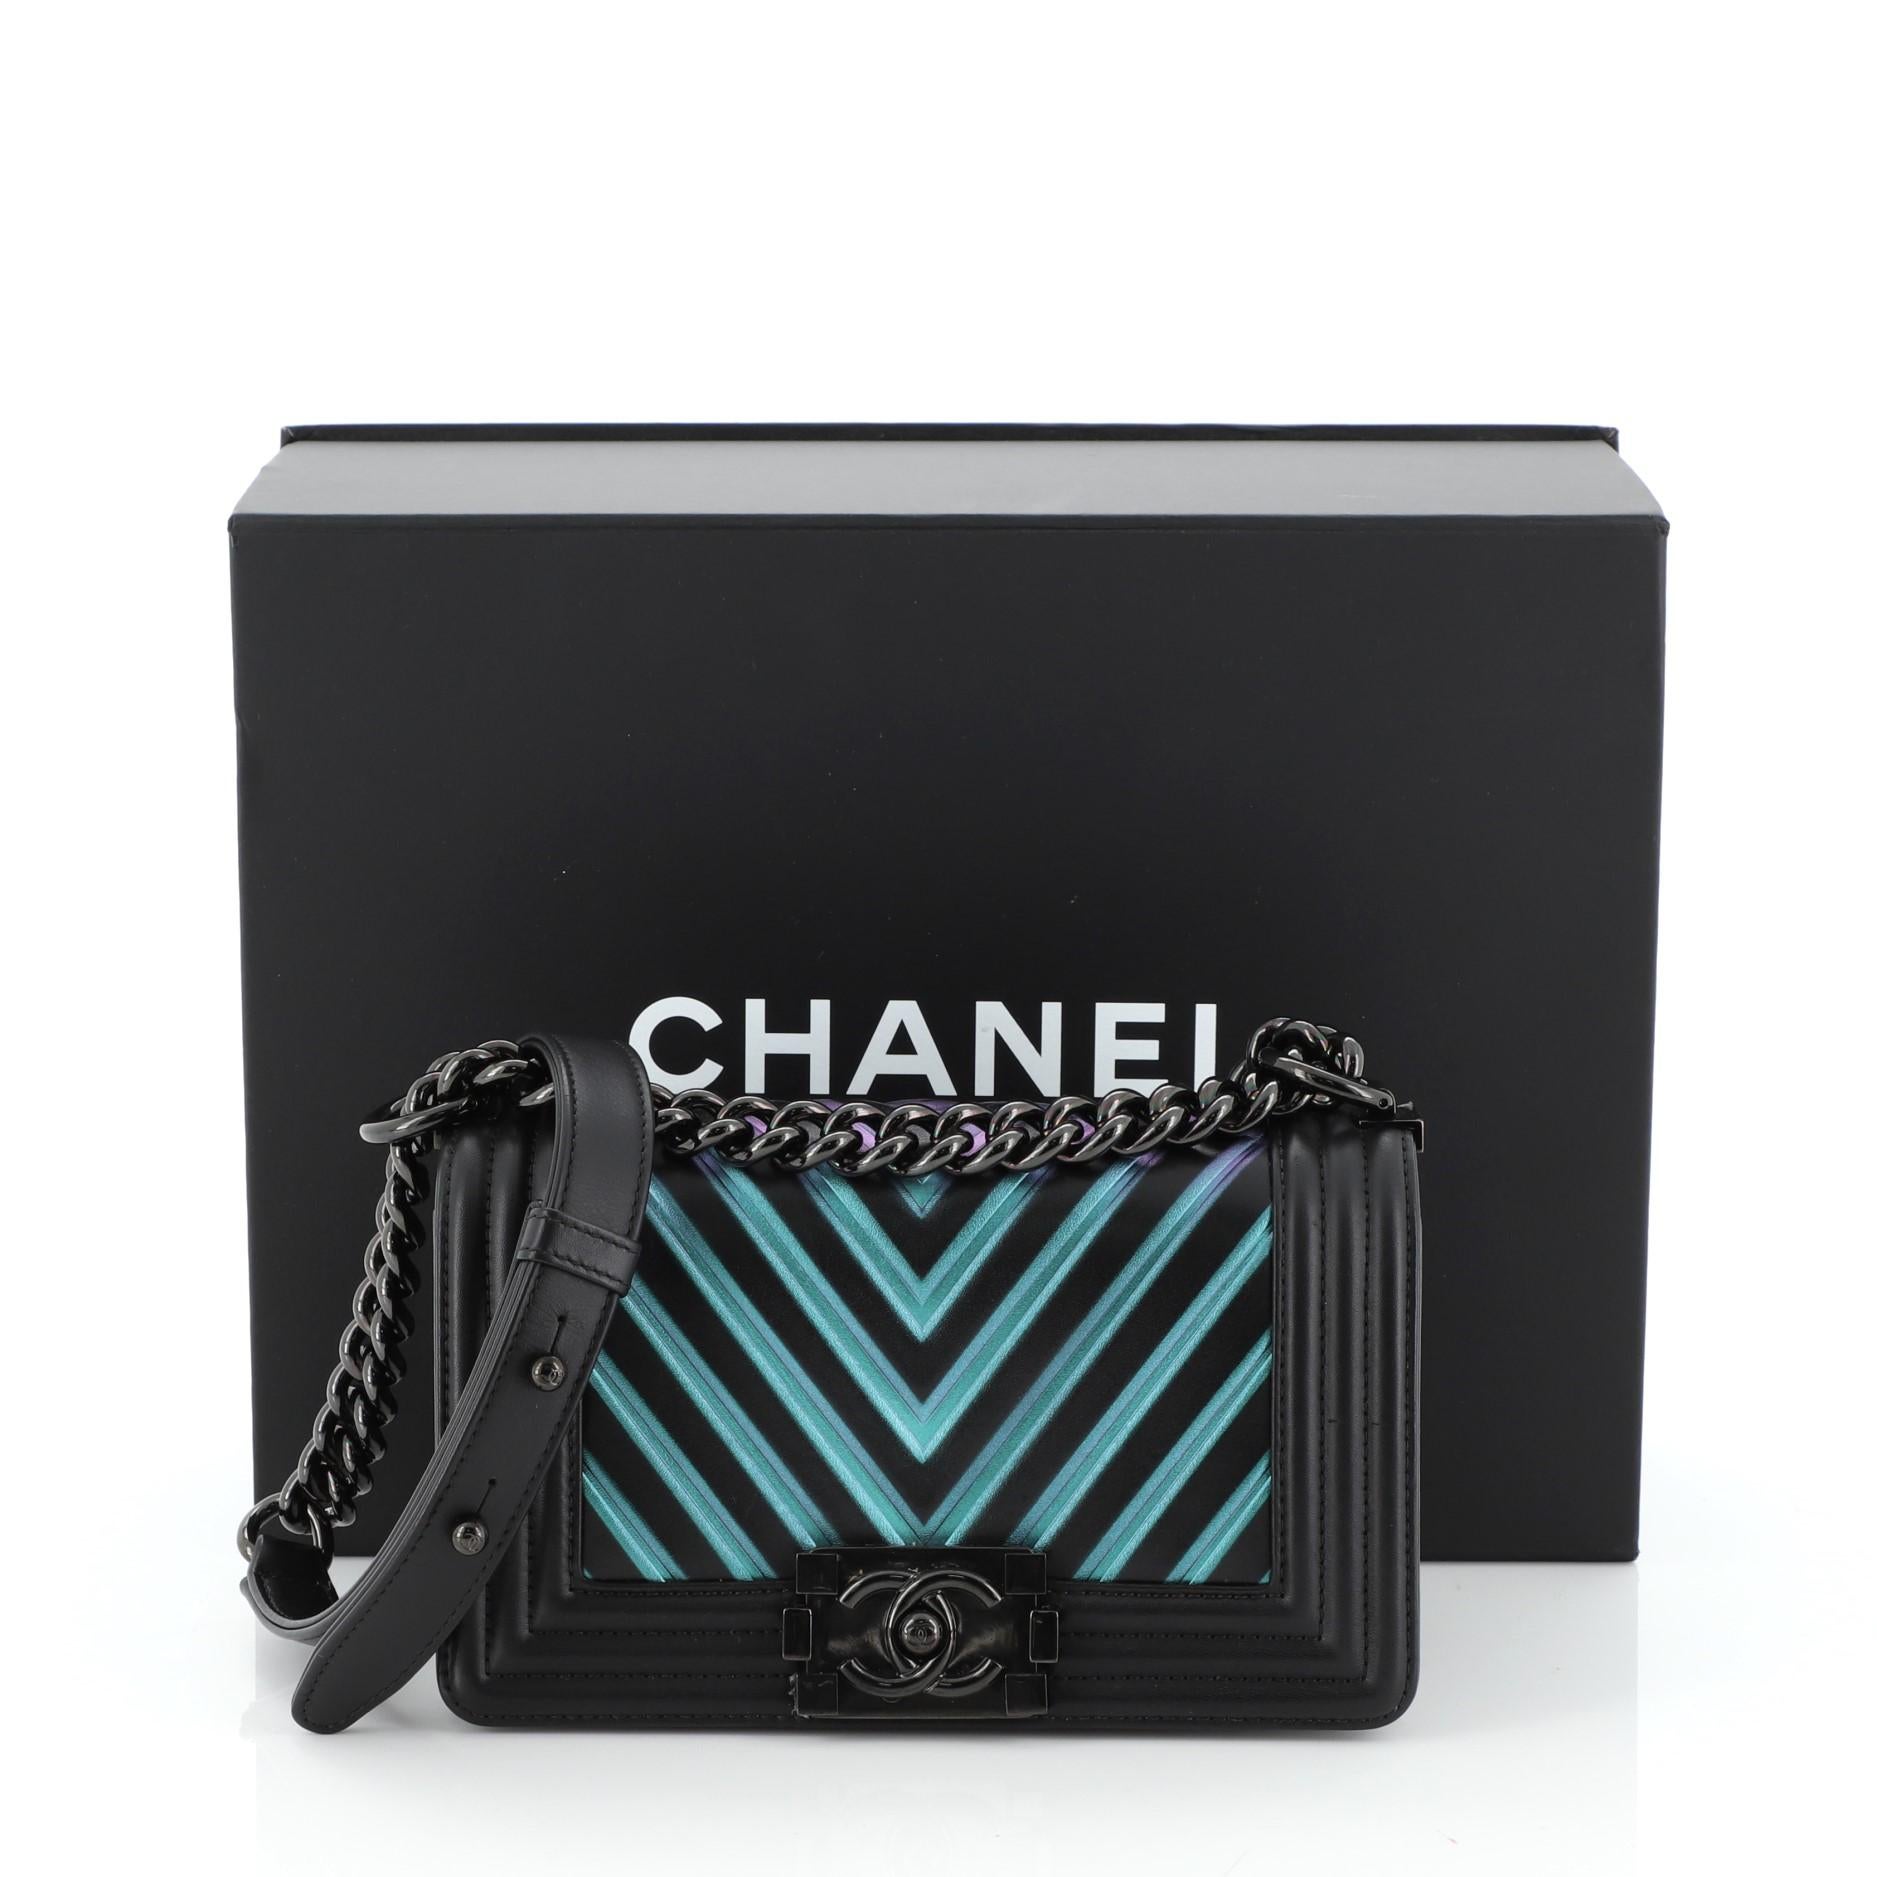 This Chanel Boy Flap Bag Chevron Painted Calfskin Small, crafted from black and multicolor chevron painted calfskin leather, features chain link strap with leather pad, and black and iridescent rainbow-tone hardware. Its CC Boy push lock closure